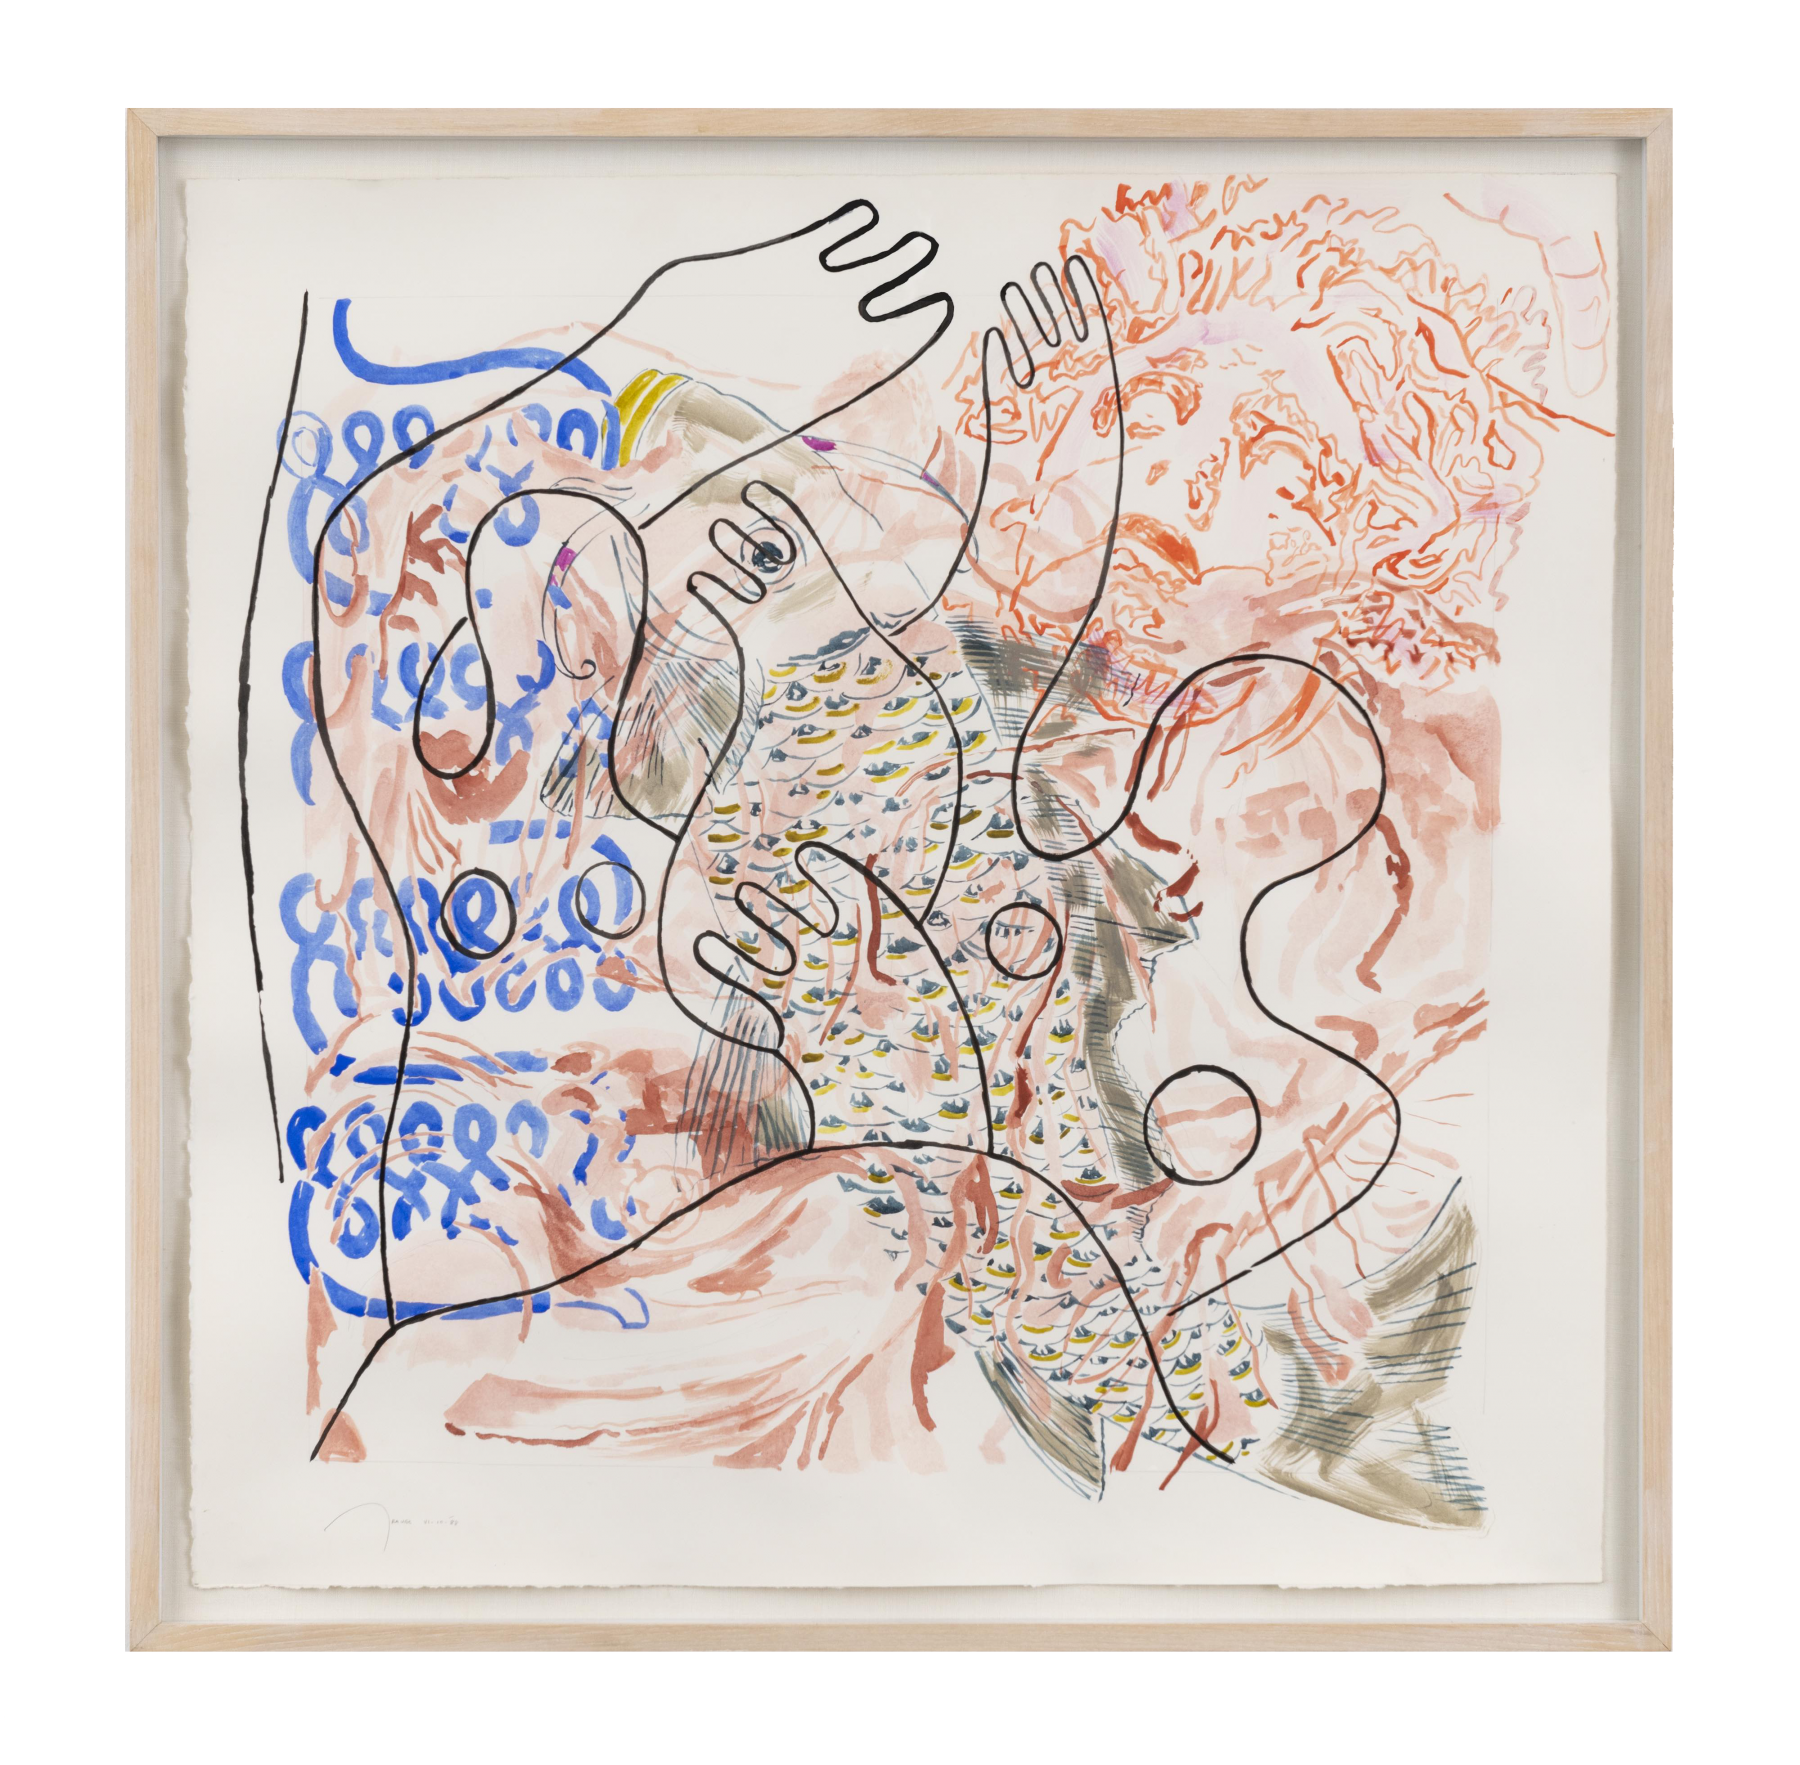 NANCY GRAVES
Talaria, 1988
Gouache and graphite on paper
30 by 30 in. 76.2 by 76.2 cm. 30 by 30 1/4 in. 76.2 by 76.8 cm.

&amp;nbsp;

&amp;copy; Nancy Graves Foundation, Inc./Licensed by VAGA at Artists Rights Society (ARS), New York

&amp;nbsp;